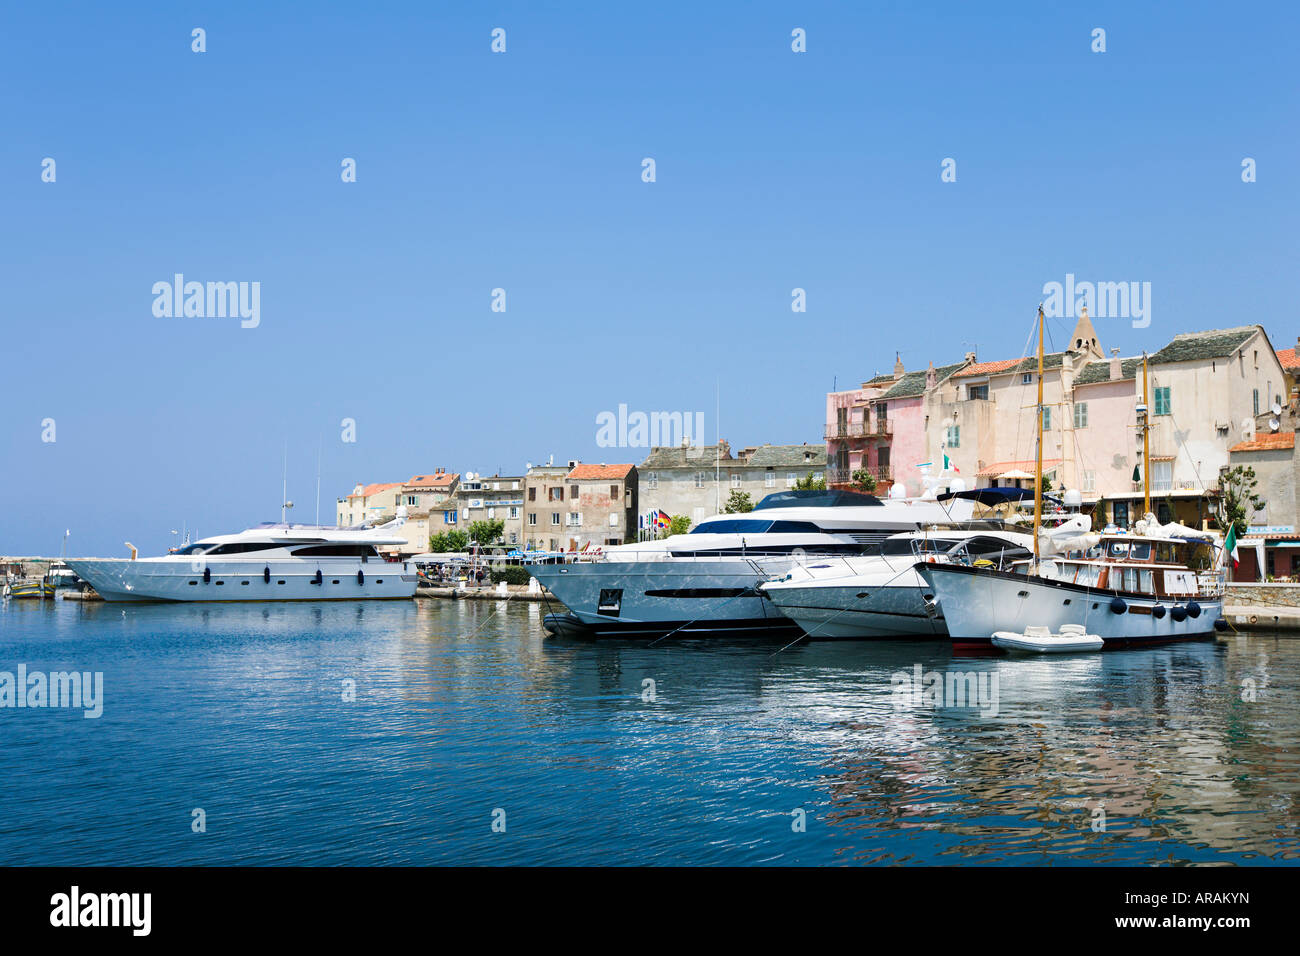 Luxury Yachts in the harbour at St Florent, The Nebbio, Corsica, France Stock Photo